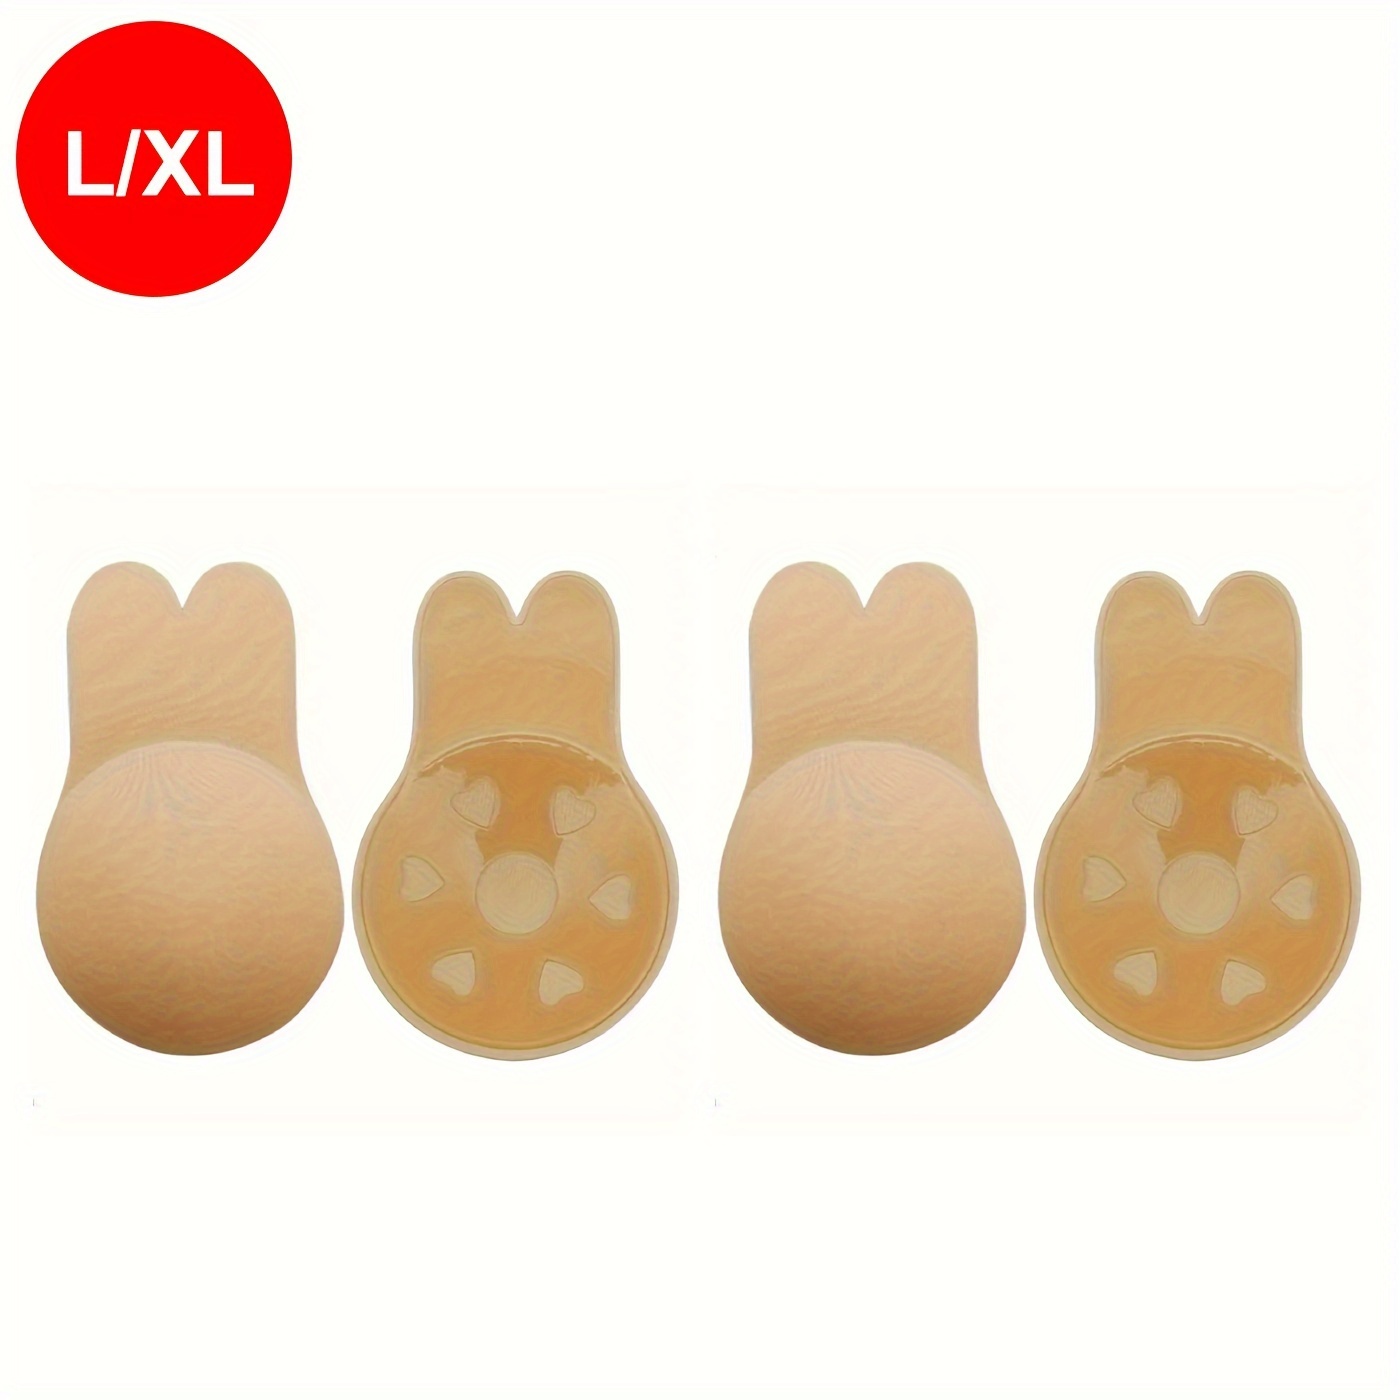 Connectwide Body Tape Breast Lift Tape Adhesive Bra for Women Instant Breast  Lift Invisible Tape Bra Uplift Push Silicone Push Up Bra Pads Price in  India - Buy Connectwide Body Tape Breast